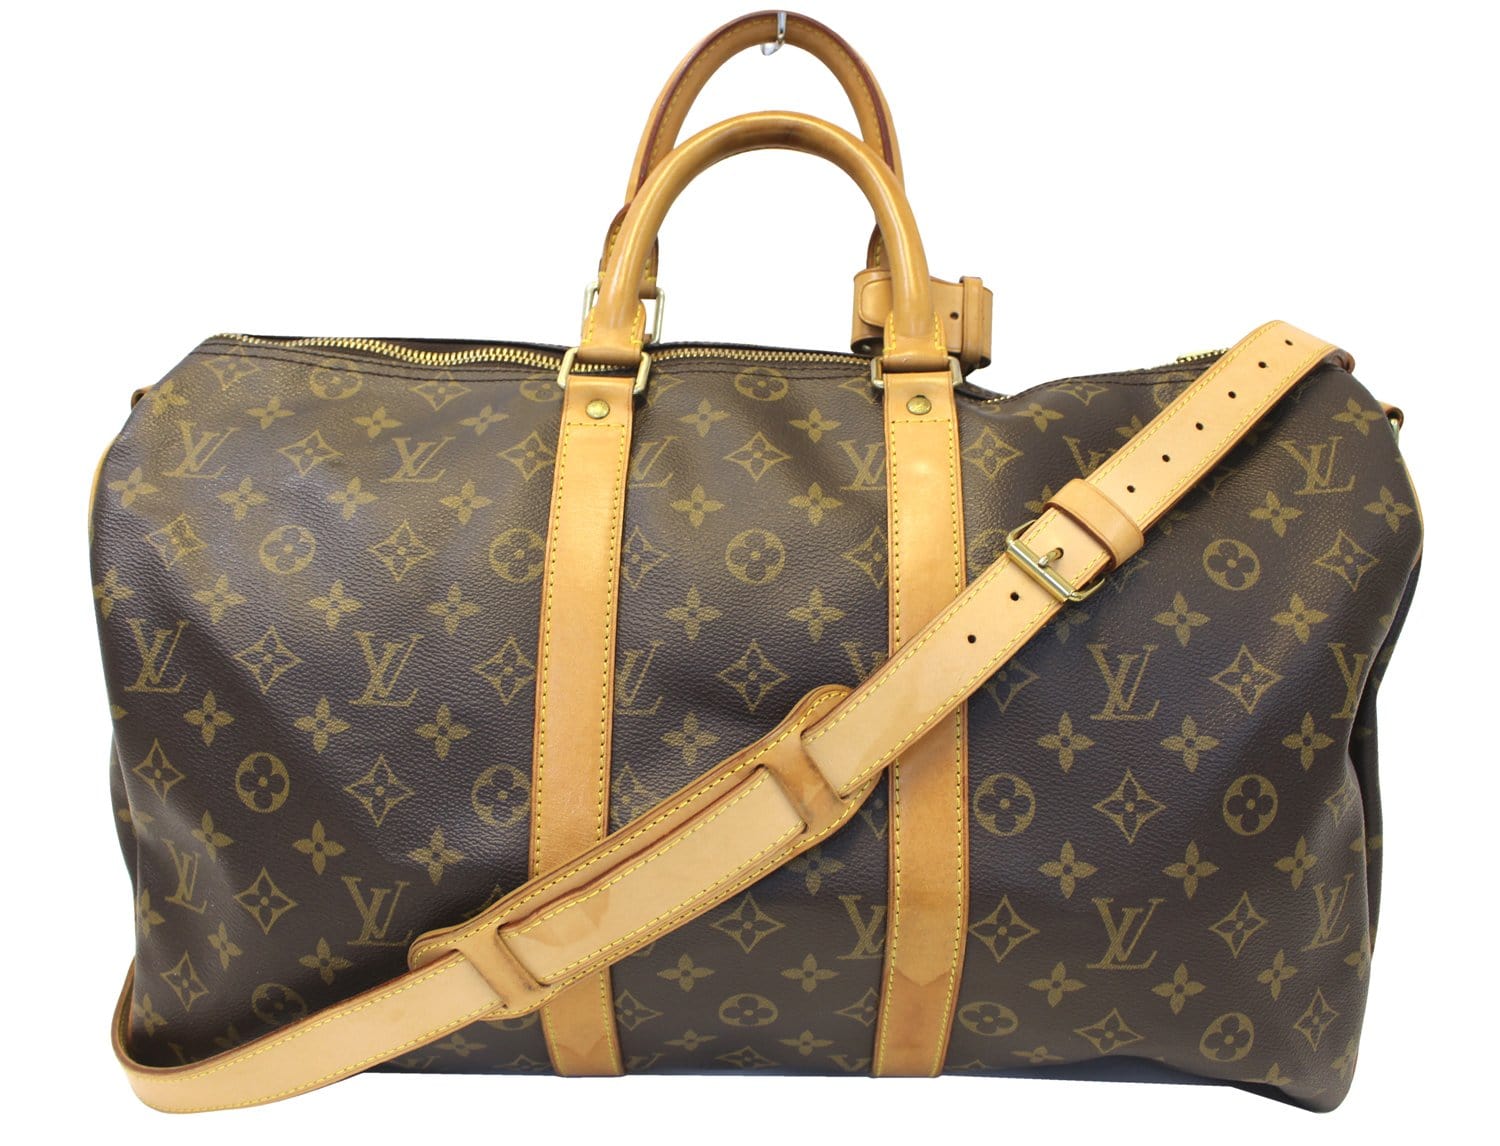 WHEN I BOUGHT a L.V DUFFLE BAG for $$$$ !! Louis Vuitton Bandouliere 45 🔥  